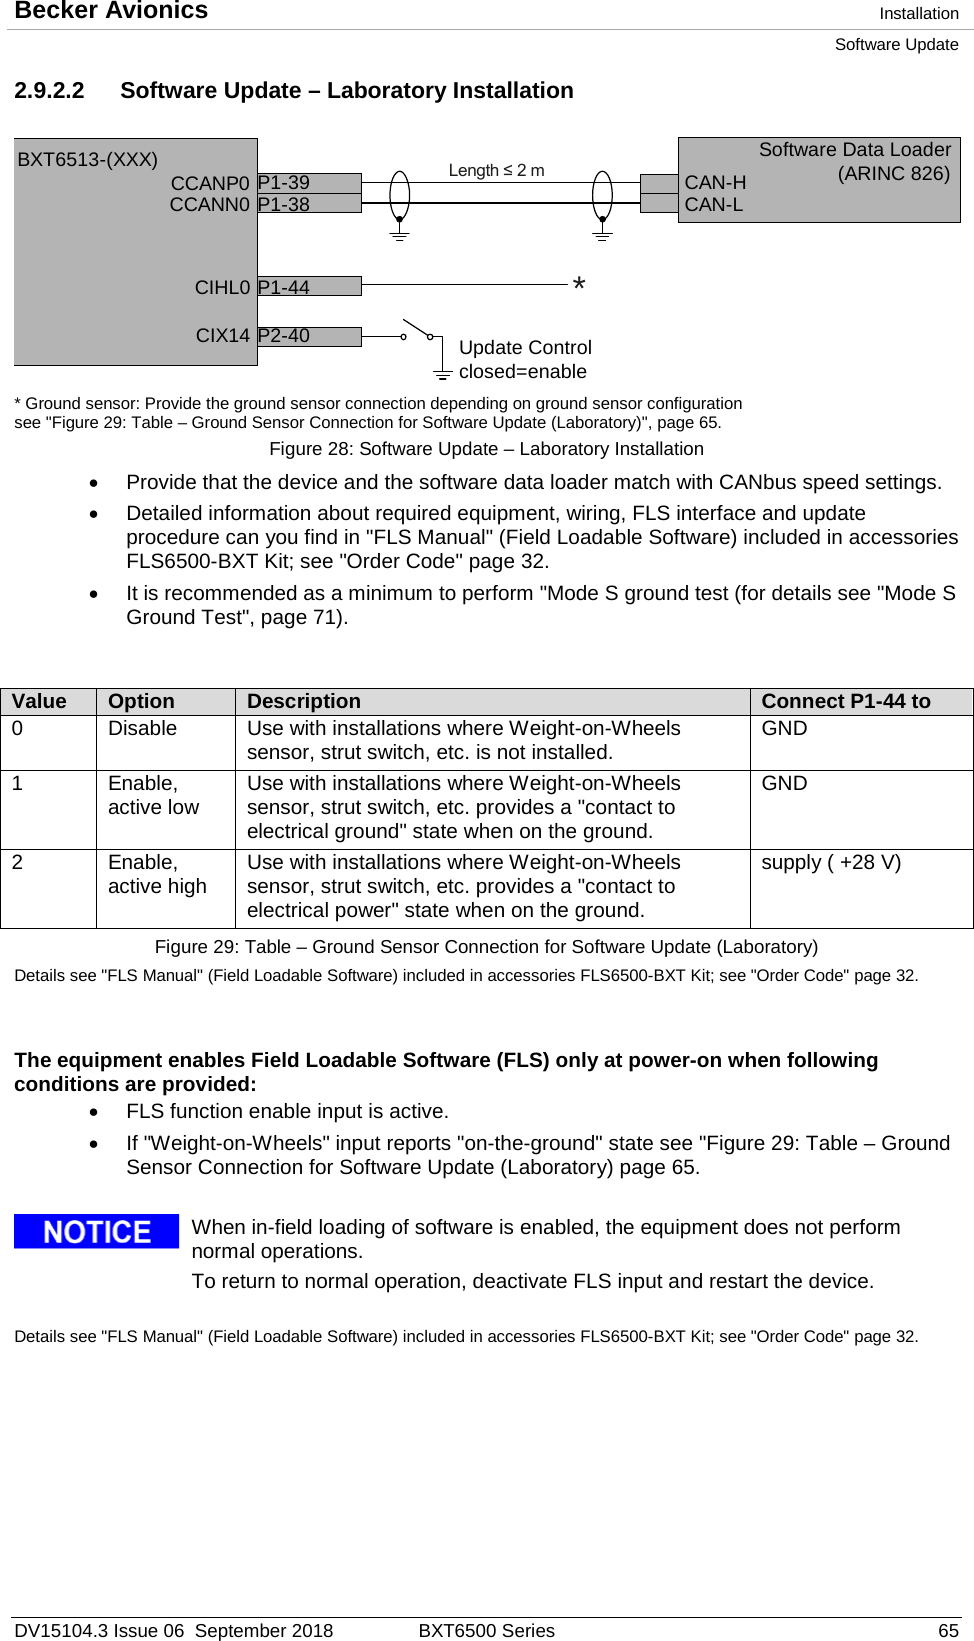 Becker Avionics  Installation Software Update  DV15104.3 Issue 06  September 2018 BXT6500 Series 65 2.9.2.2 Software Update – Laboratory Installation   * Ground sensor: Provide the ground sensor connection depending on ground sensor configuration  see &quot;Figure 29: Table – Ground Sensor Connection for Software Update (Laboratory)&quot;, page 65. Figure 28: Software Update – Laboratory Installation  • Provide that the device and the software data loader match with CANbus speed settings. • Detailed information about required equipment, wiring, FLS interface and update procedure can you find in &quot;FLS Manual&quot; (Field Loadable Software) included in accessories FLS6500-BXT Kit; see &quot;Order Code&quot; page 32. • It is recommended as a minimum to perform &quot;Mode S ground test (for details see &quot;Mode S Ground Test&quot;, page 71).    Value Option Description Connect P1-44 to 0 Disable Use with installations where Weight-on-Wheels sensor, strut switch, etc. is not installed. GND 1 Enable, active low Use with installations where Weight-on-Wheels sensor, strut switch, etc. provides a &quot;contact to electrical ground&quot; state when on the ground. GND 2 Enable, active high Use with installations where Weight-on-Wheels sensor, strut switch, etc. provides a &quot;contact to electrical power&quot; state when on the ground. supply ( +28 V)  Figure 29: Table – Ground Sensor Connection for Software Update (Laboratory)  Details see &quot;FLS Manual&quot; (Field Loadable Software) included in accessories FLS6500-BXT Kit; see &quot;Order Code&quot; page 32.   The equipment enables Field Loadable Software (FLS) only at power-on when following conditions are provided: • FLS function enable input is active. • If &quot;Weight-on-Wheels&quot; input reports &quot;on-the-ground&quot; state see &quot;Figure 29: Table – Ground Sensor Connection for Software Update (Laboratory) page 65.    When in-field loading of software is enabled, the equipment does not perform normal operations. To return to normal operation, deactivate FLS input and restart the device.   Details see &quot;FLS Manual&quot; (Field Loadable Software) included in accessories FLS6500-BXT Kit; see &quot;Order Code&quot; page 32.   CCANP0CCANN0CIX14 P2-40CIHL0 P1-44Update Controlclosed=enable*Length ≤ 2 mP1-39P1-38 CAN-HCAN-LBXT6513-(XXX) Software Data Loader(ARINC 826)